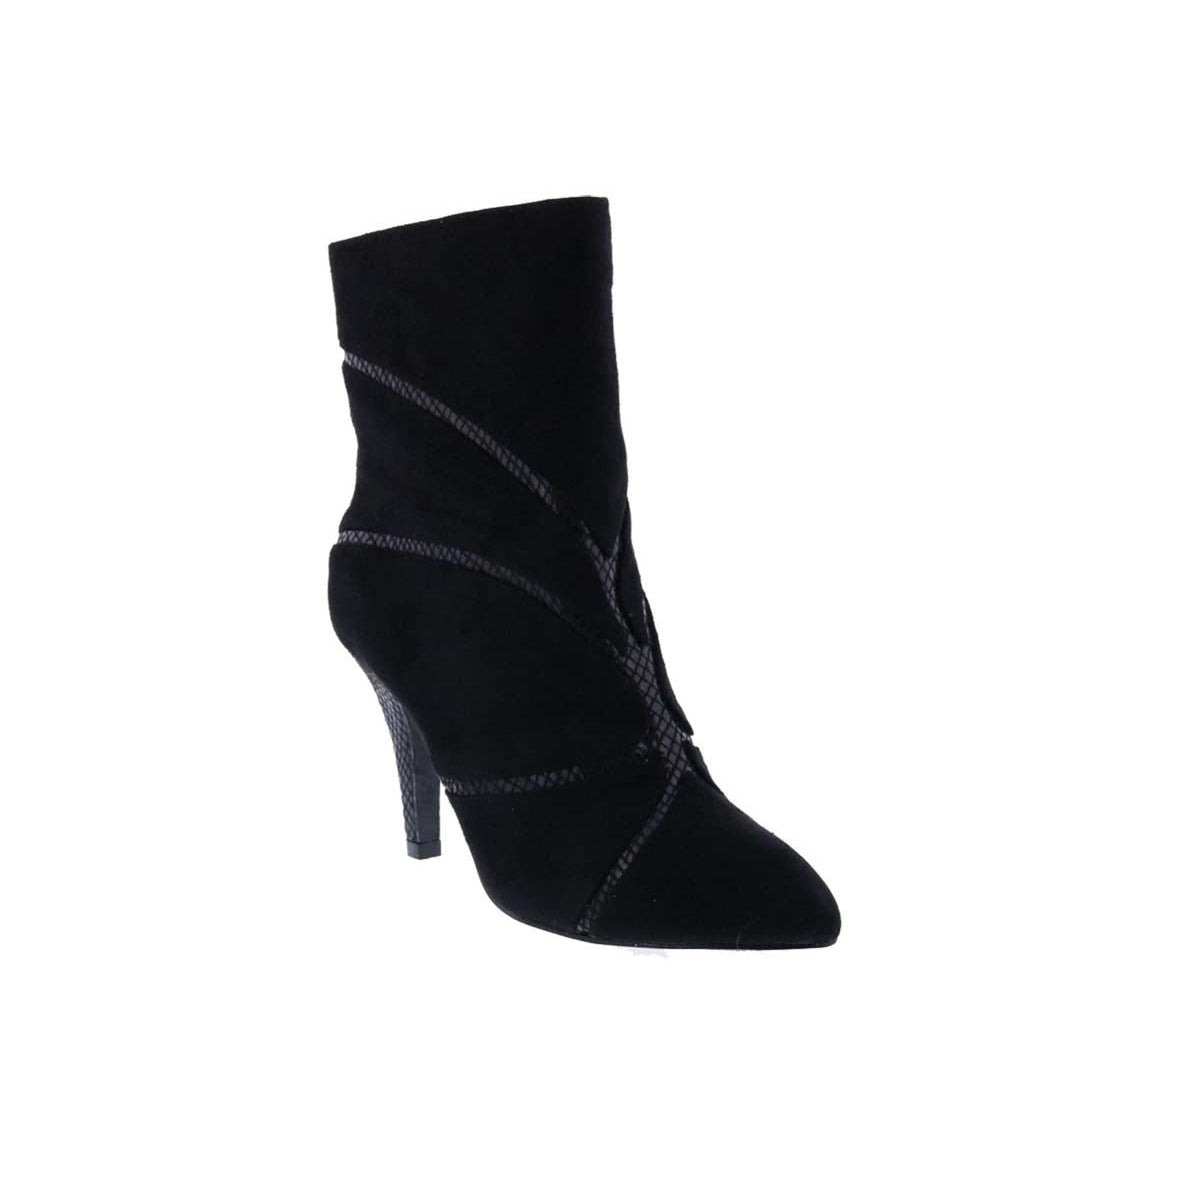 BELLINI SABLE WOMEN IN BLACK MICROSUEDE - TLW Shoes